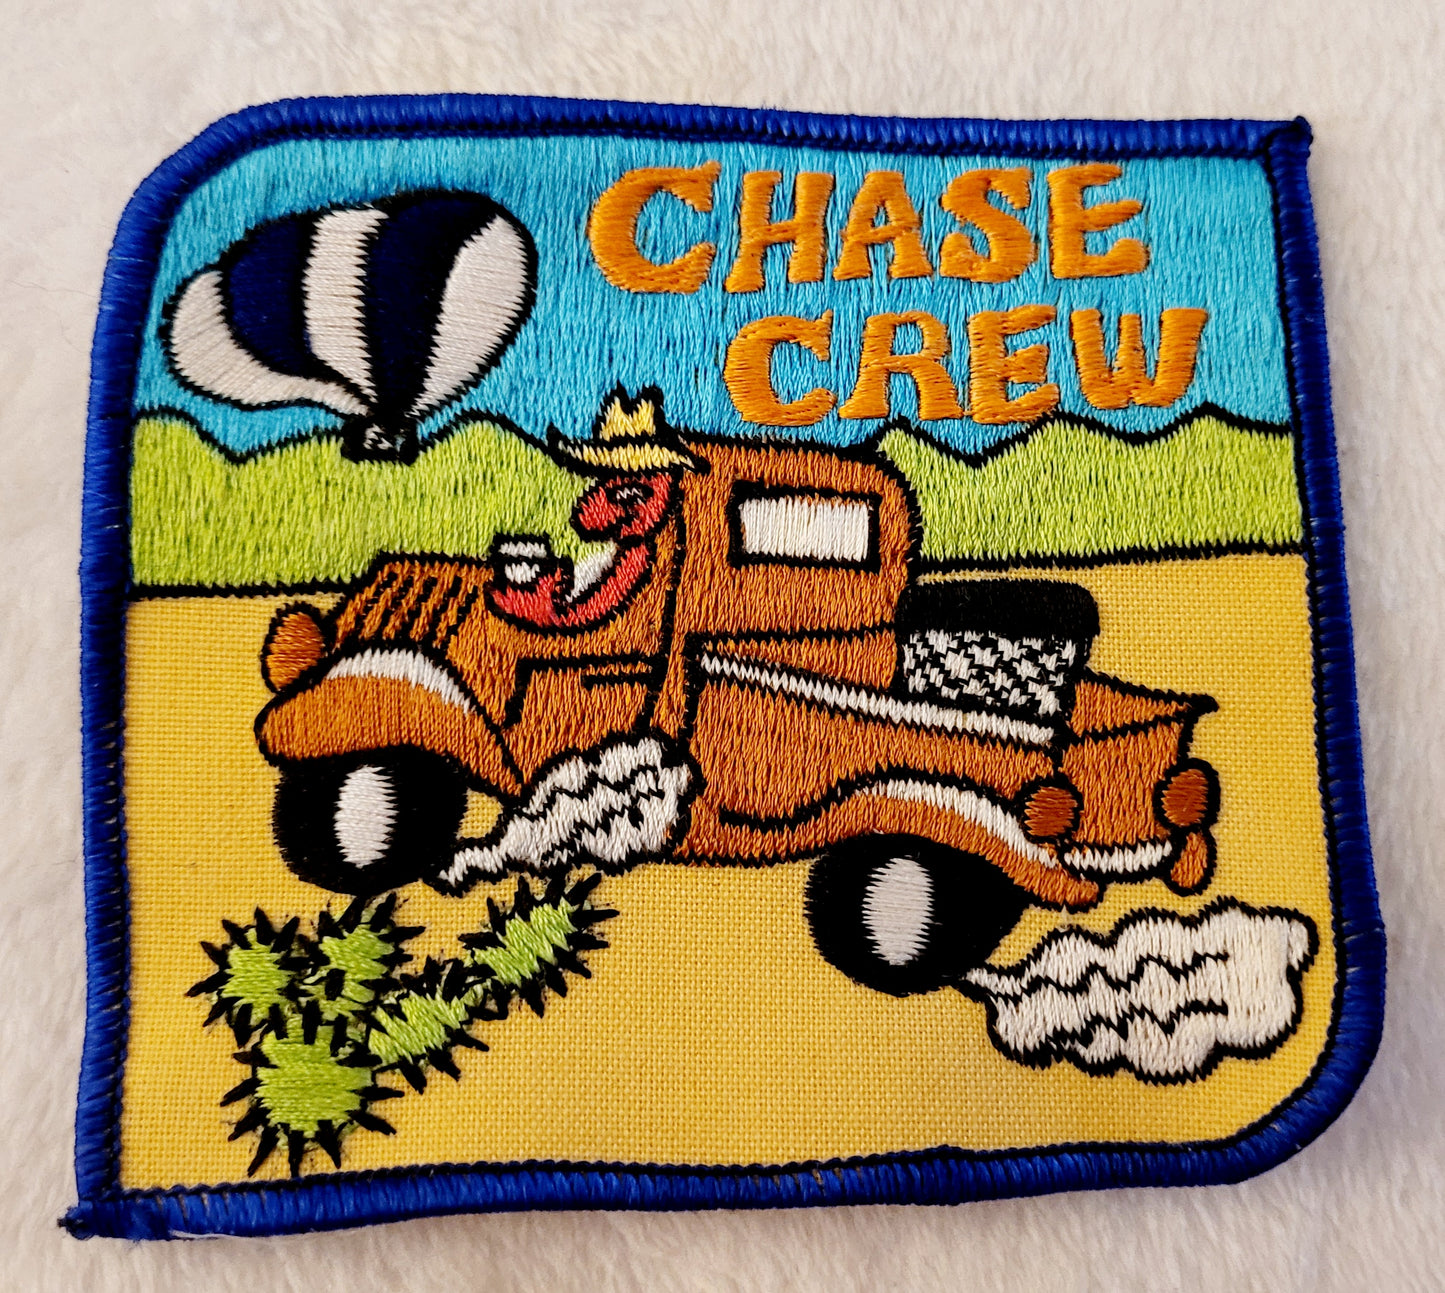 Funny & Colorful "Chase Crew" *Hot Air Balloon Patch